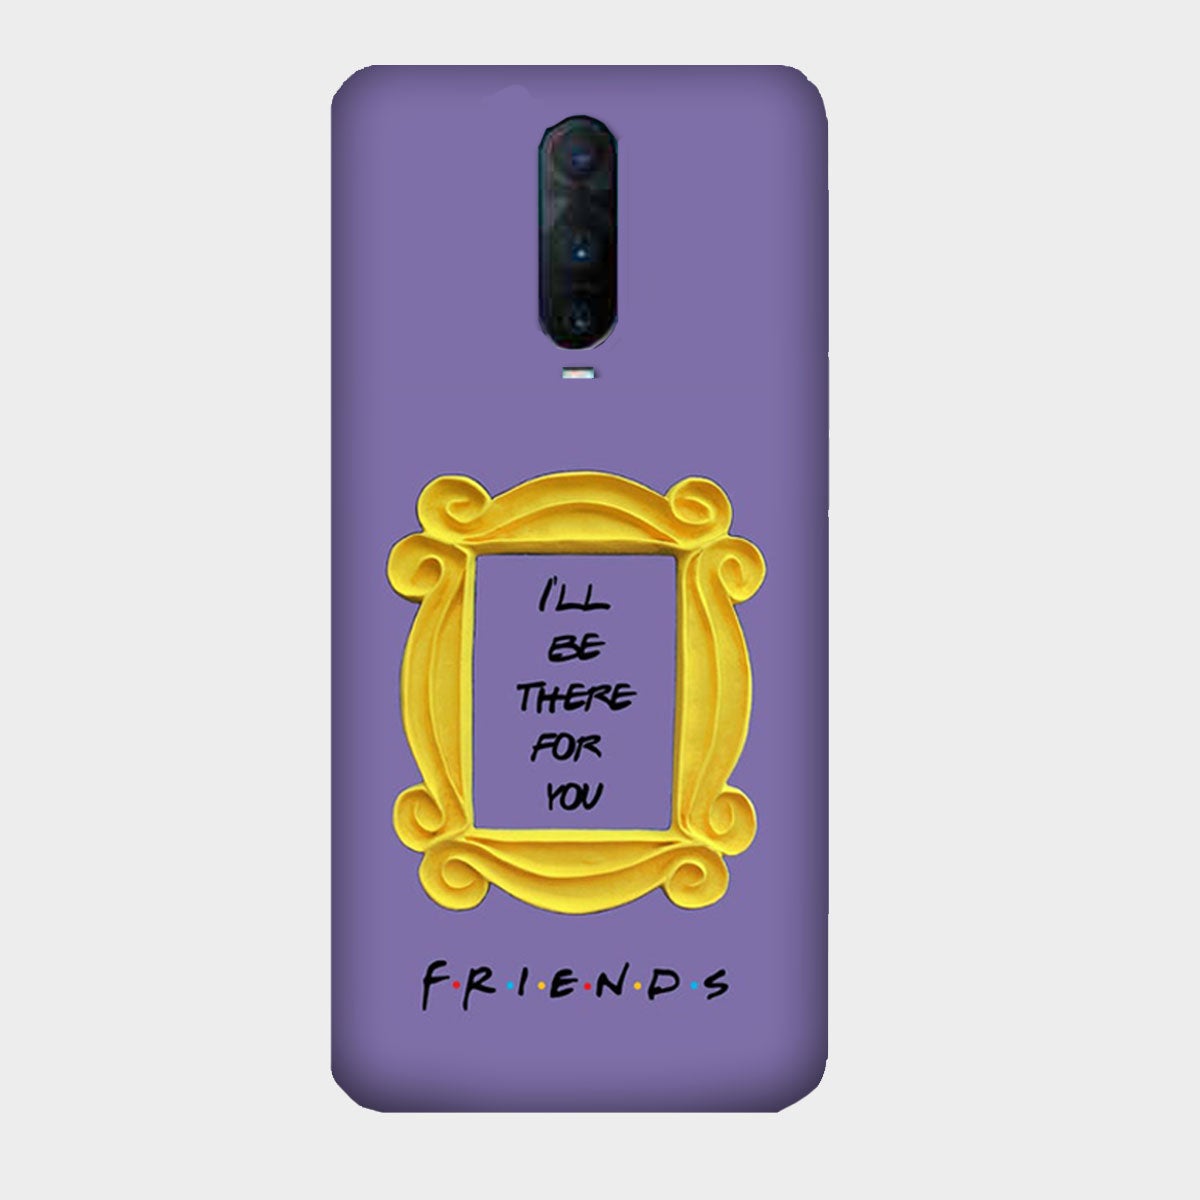 Friends - Frame - I'll be There for You - Mobile Phone Cover - Hard Case